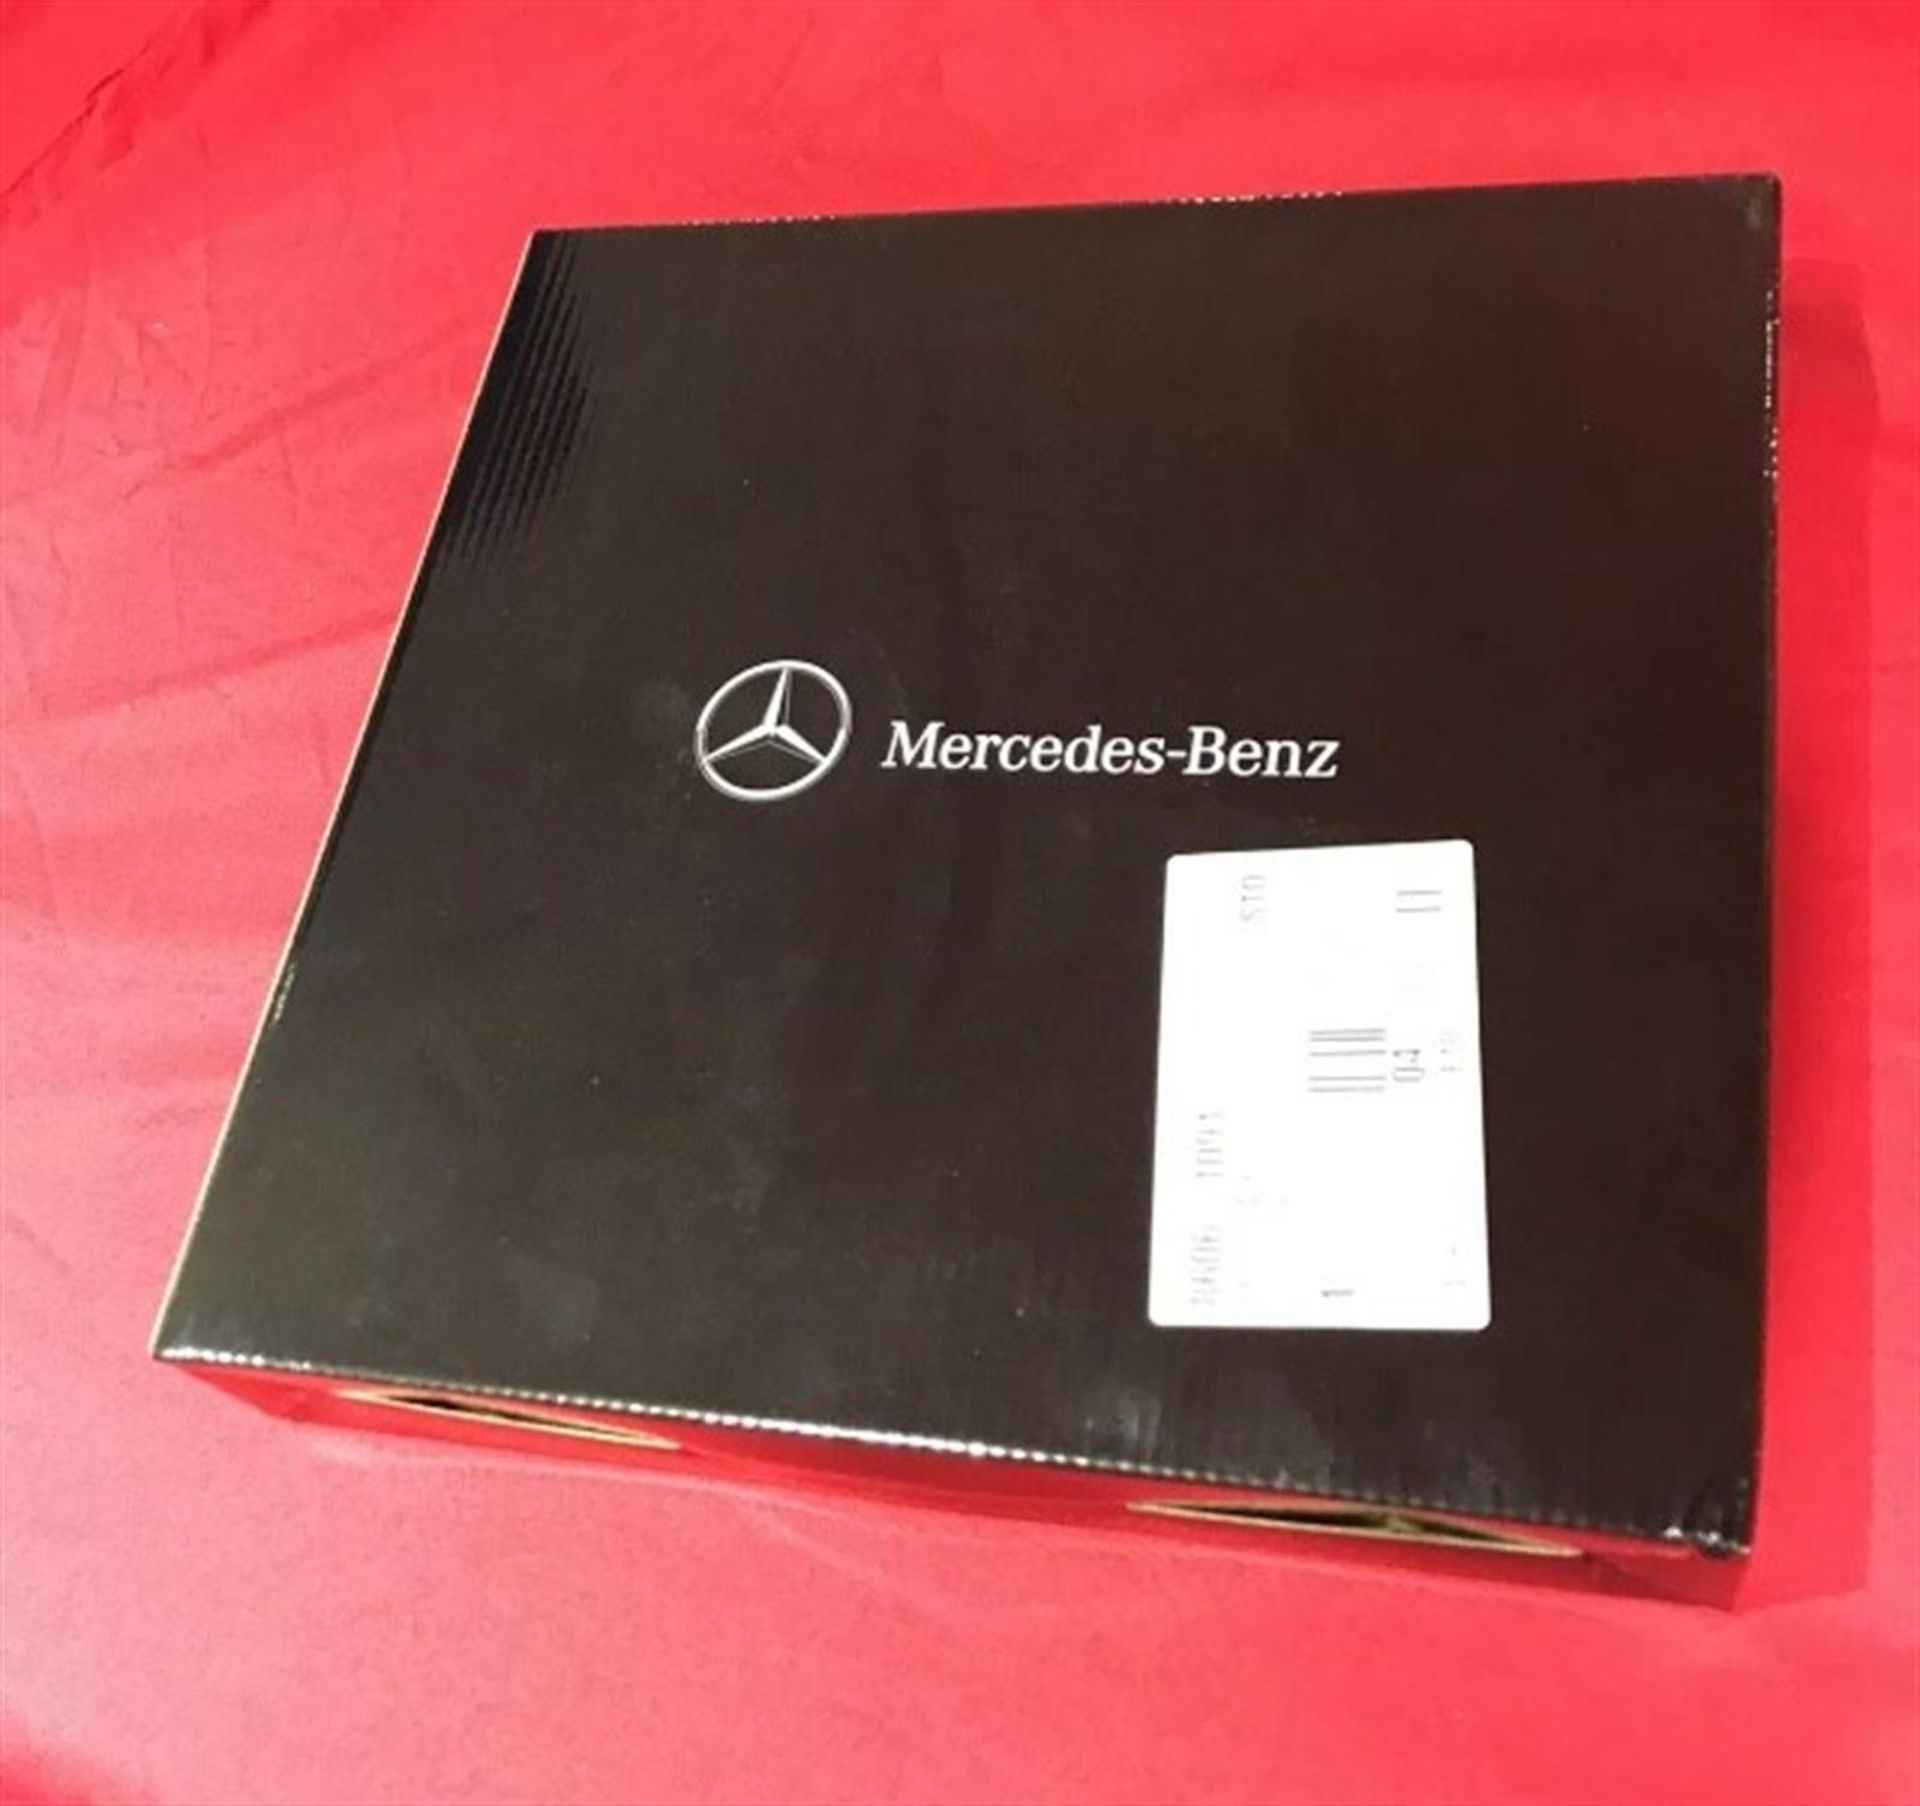 A Mercedes-Benz Themed Wall Clock - Image 5 of 5